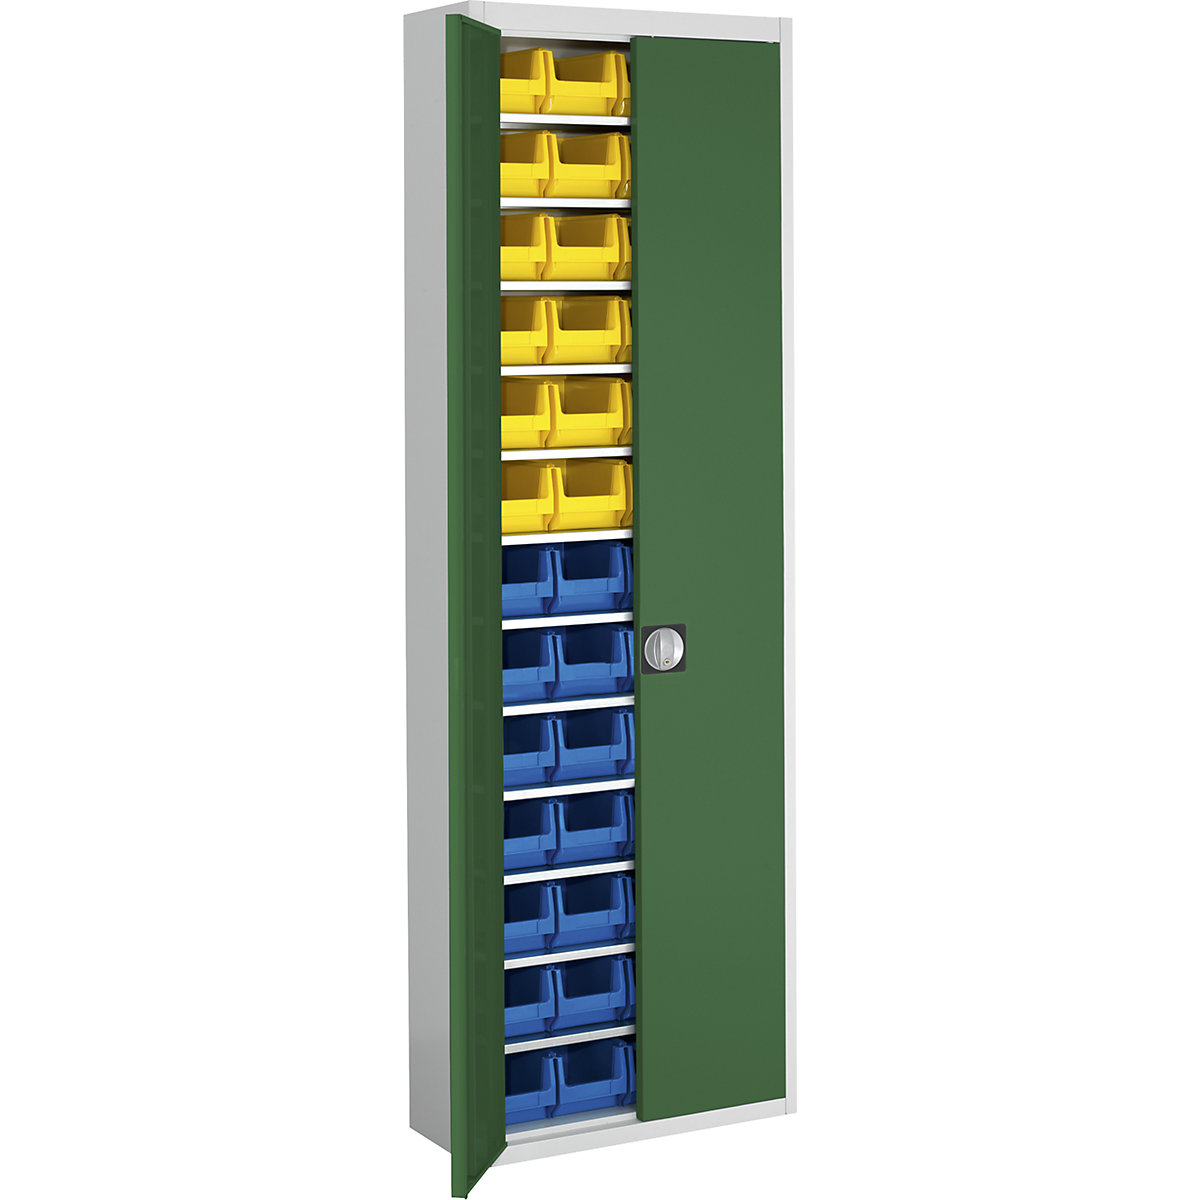 Storage cupboard with open fronted storage bins – mauser, HxWxD 2150 x 680 x 280 mm, two-colour, grey body, green doors, 52 bins-6